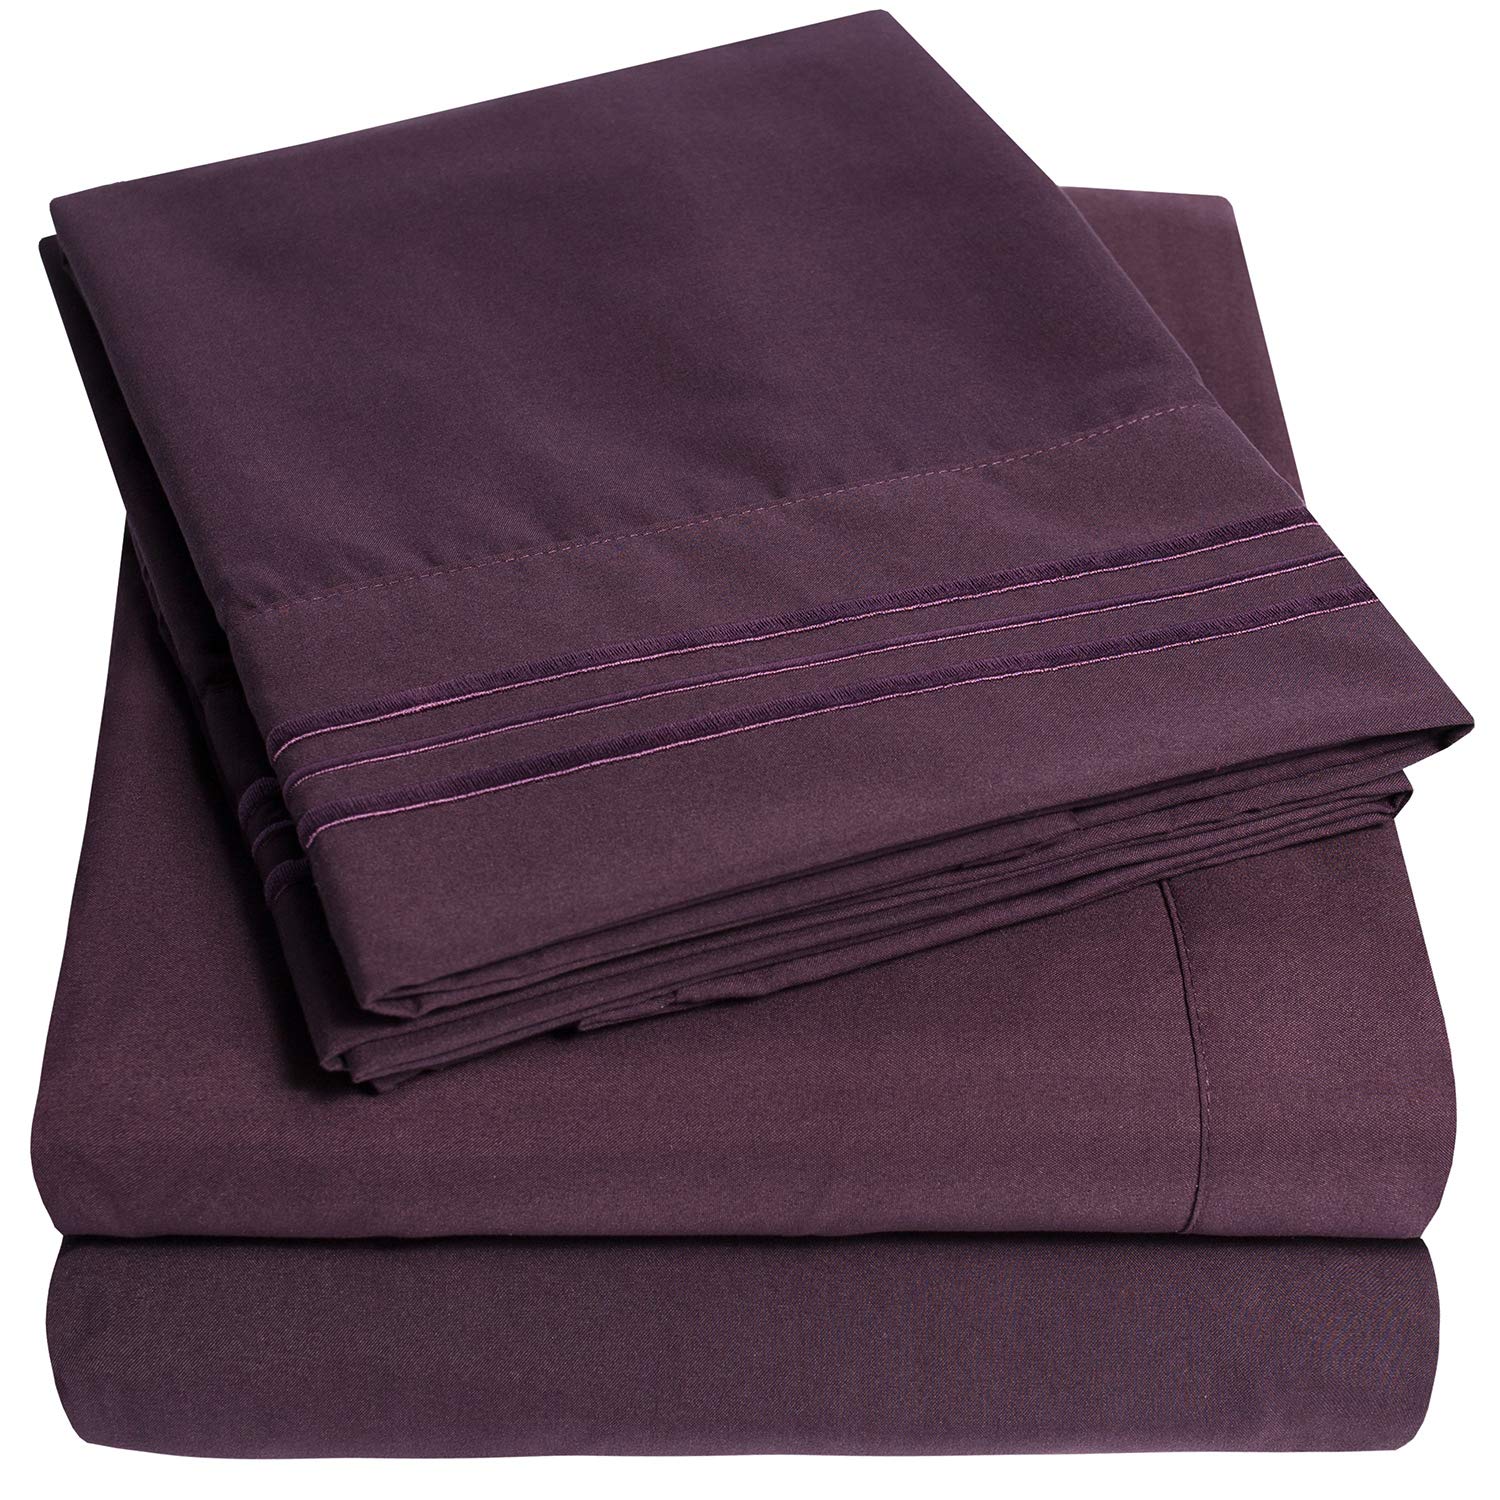 Book Cover 1500 Supreme Collection Bed Sheet Set - Extra Soft, Elastic Corner Straps, Deep Pockets, Wrinkle & Fade Resistant Hypoallergenic Sheets Set, Luxury Hotel Bedding, Queen, Purple Queen Purple